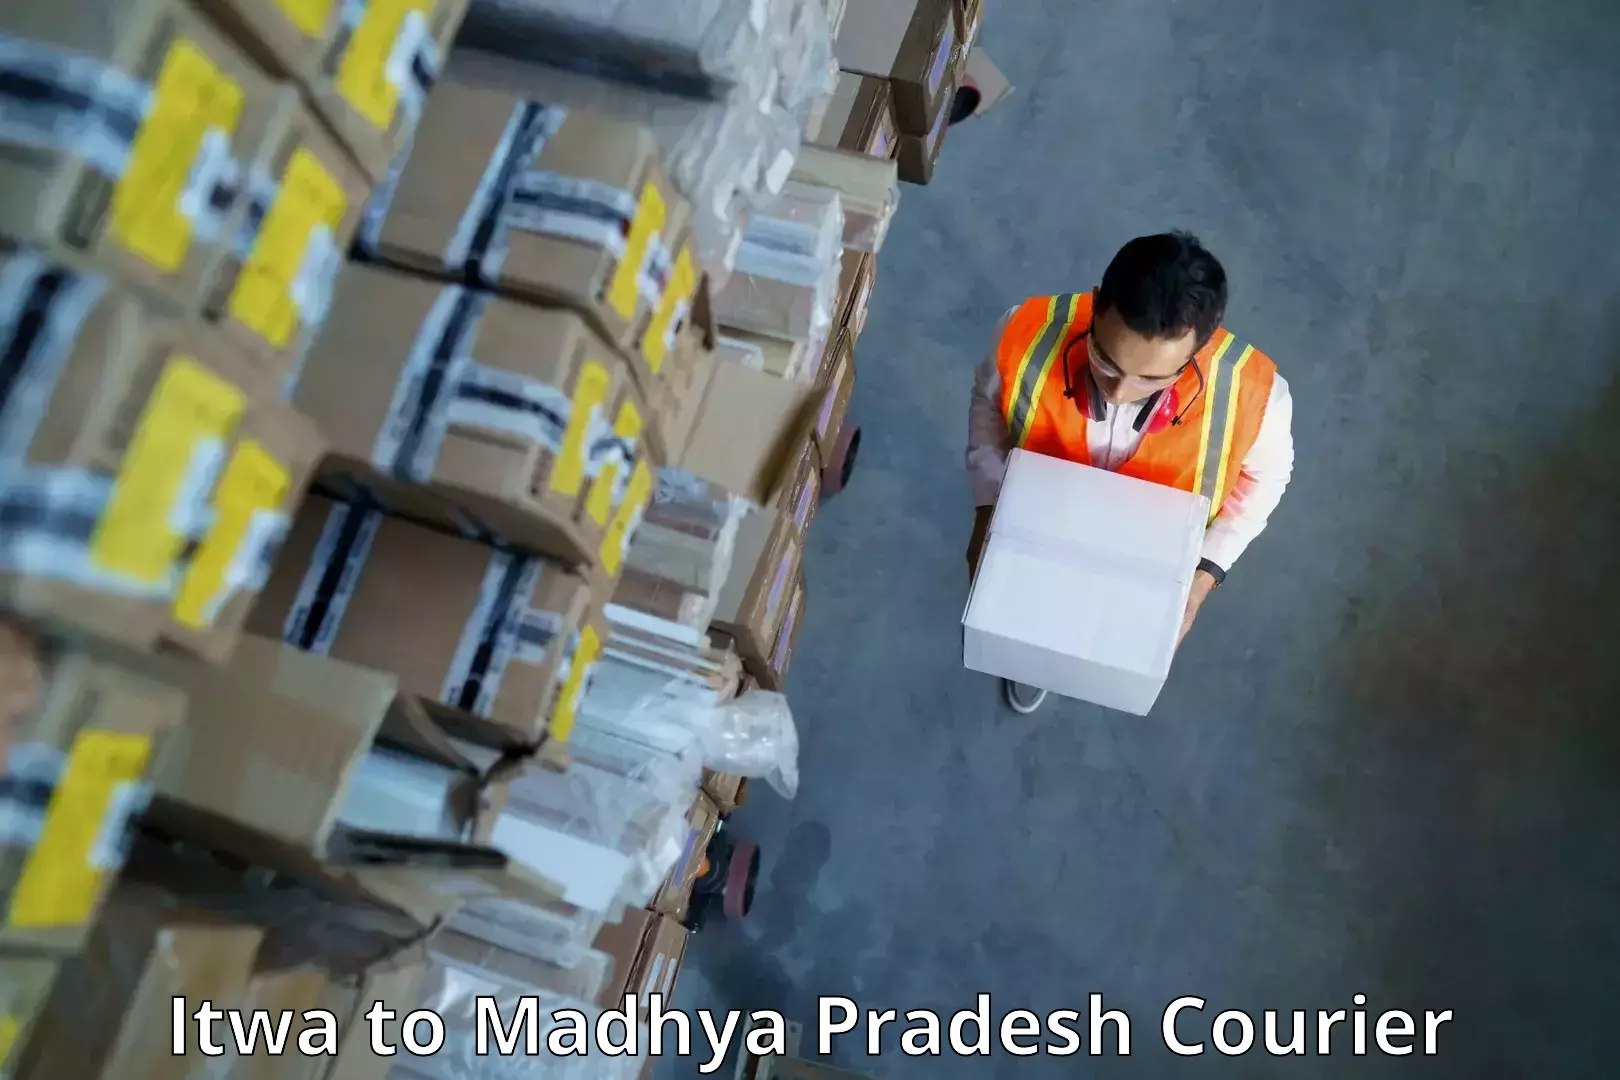 Ocean freight courier Itwa to Gotegaon